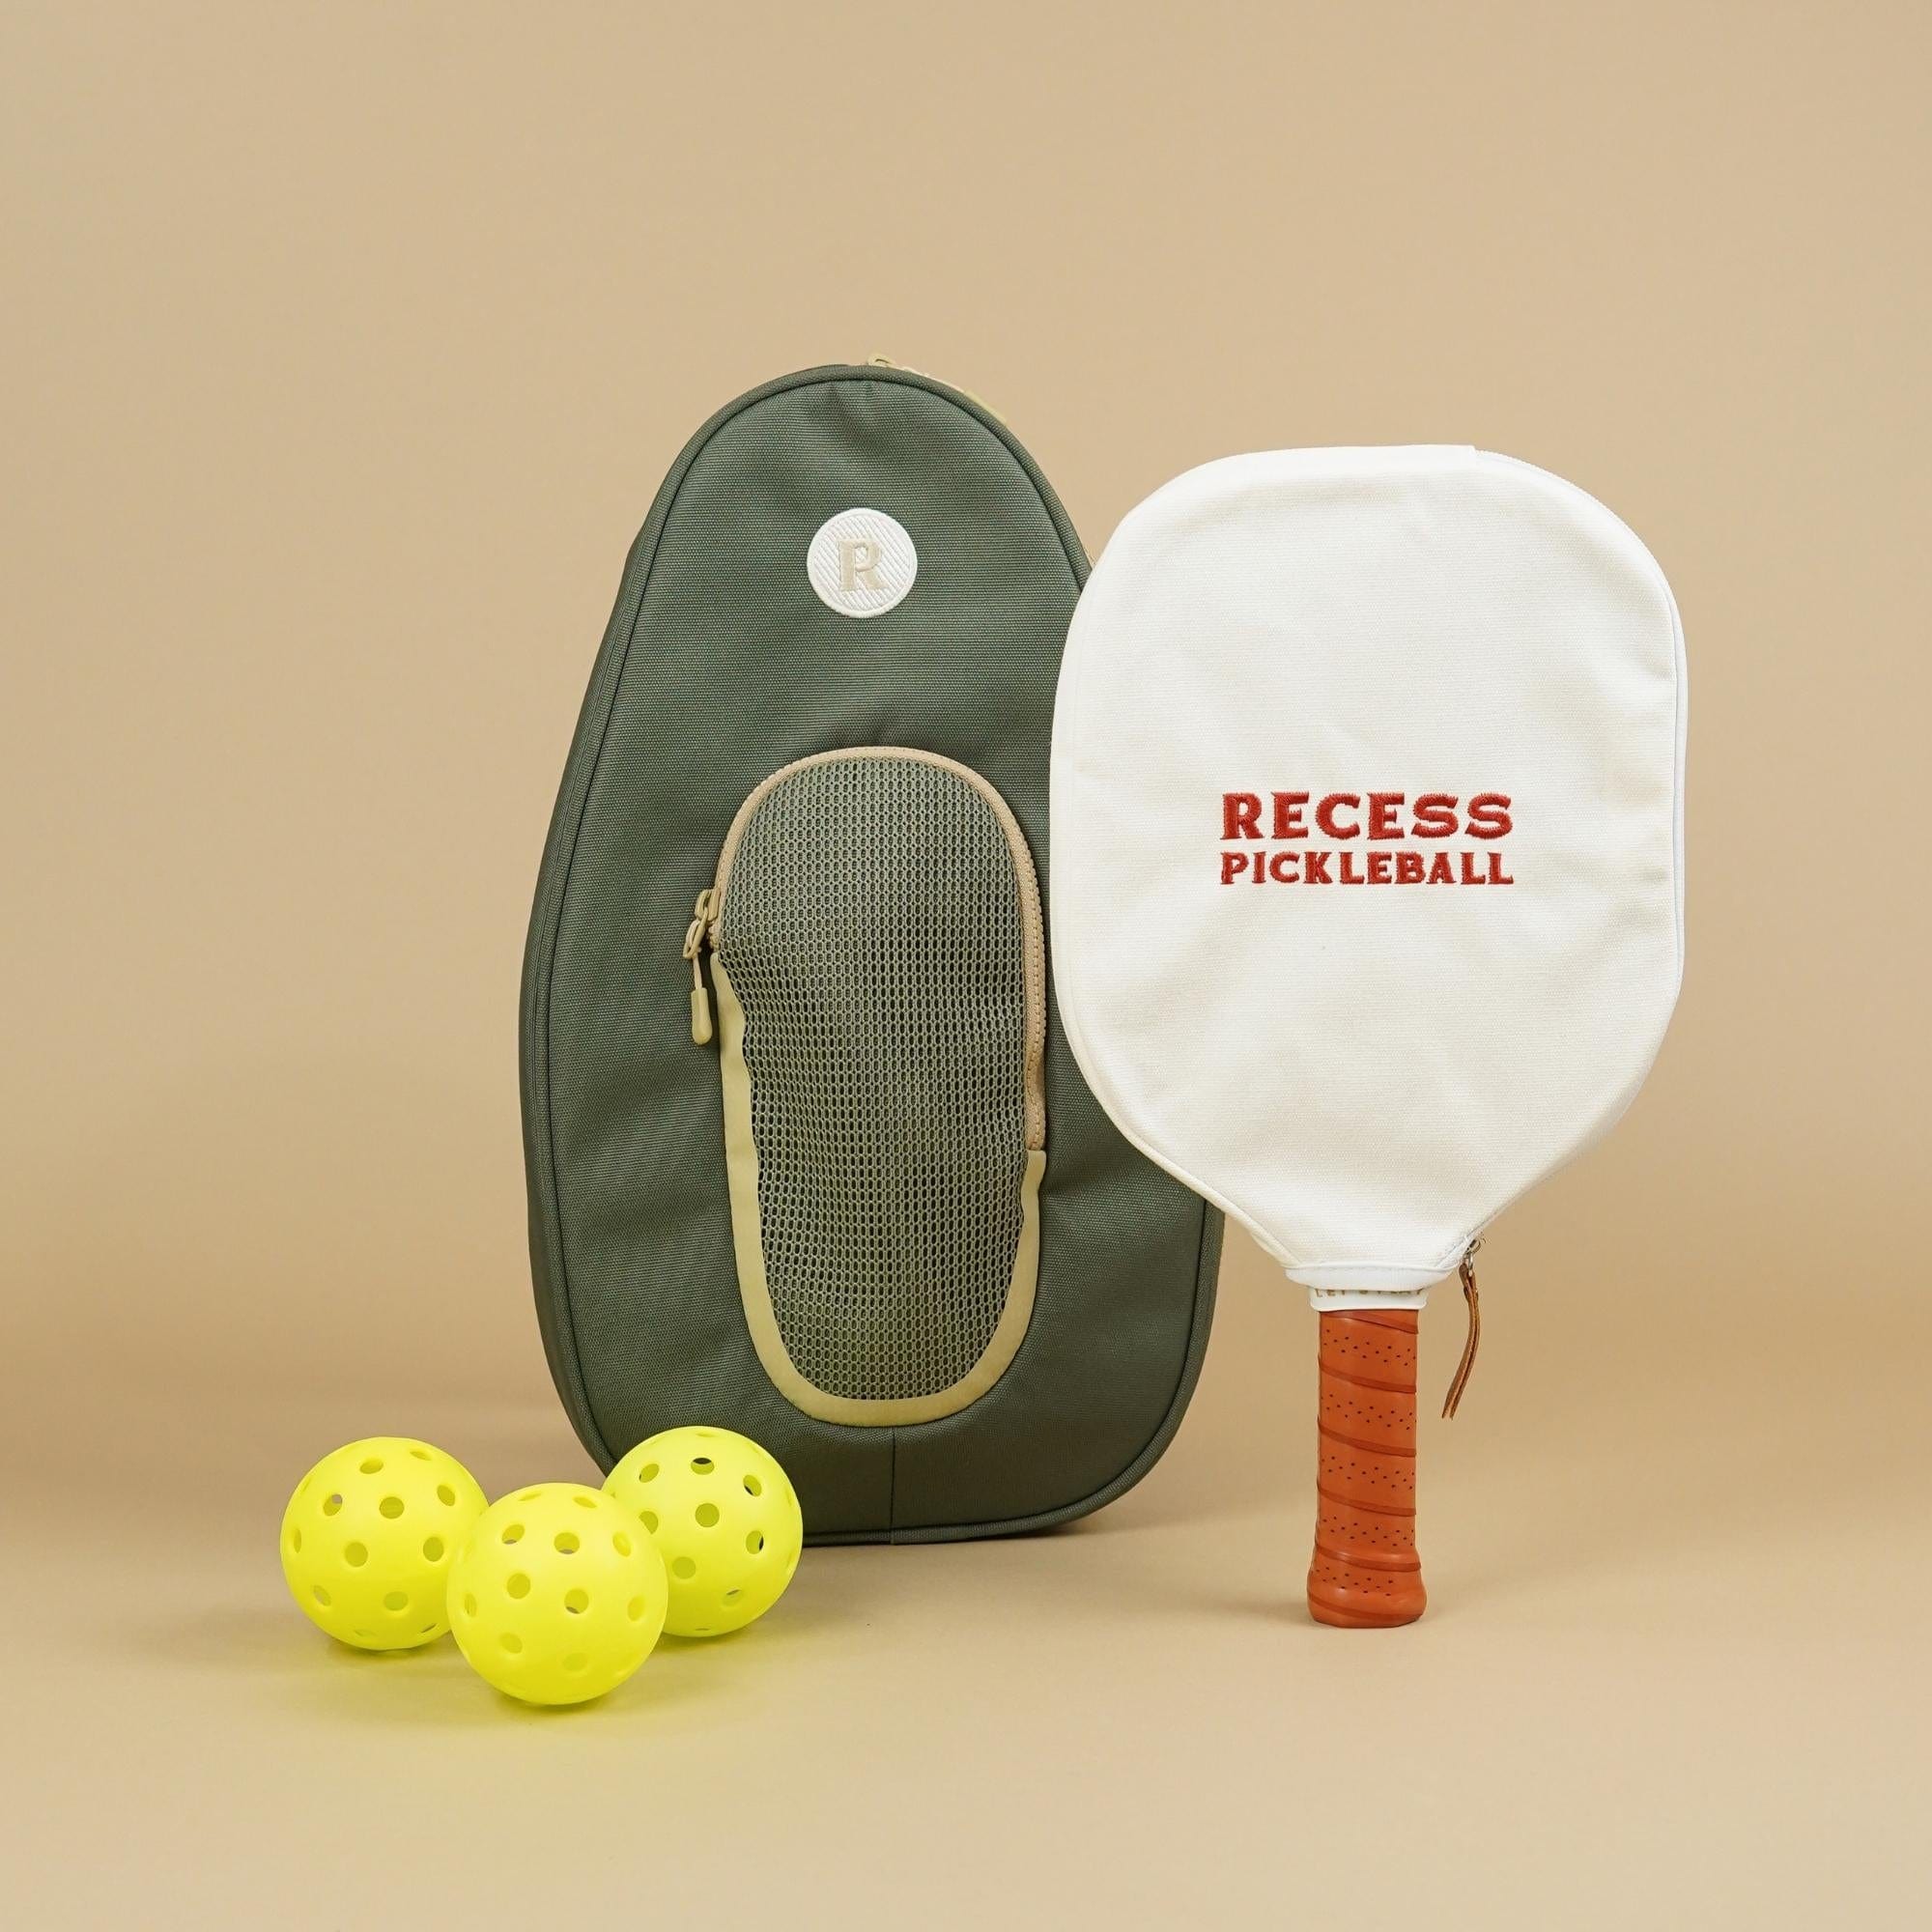 Recess Pickleball Sets Go-To Gift For Him